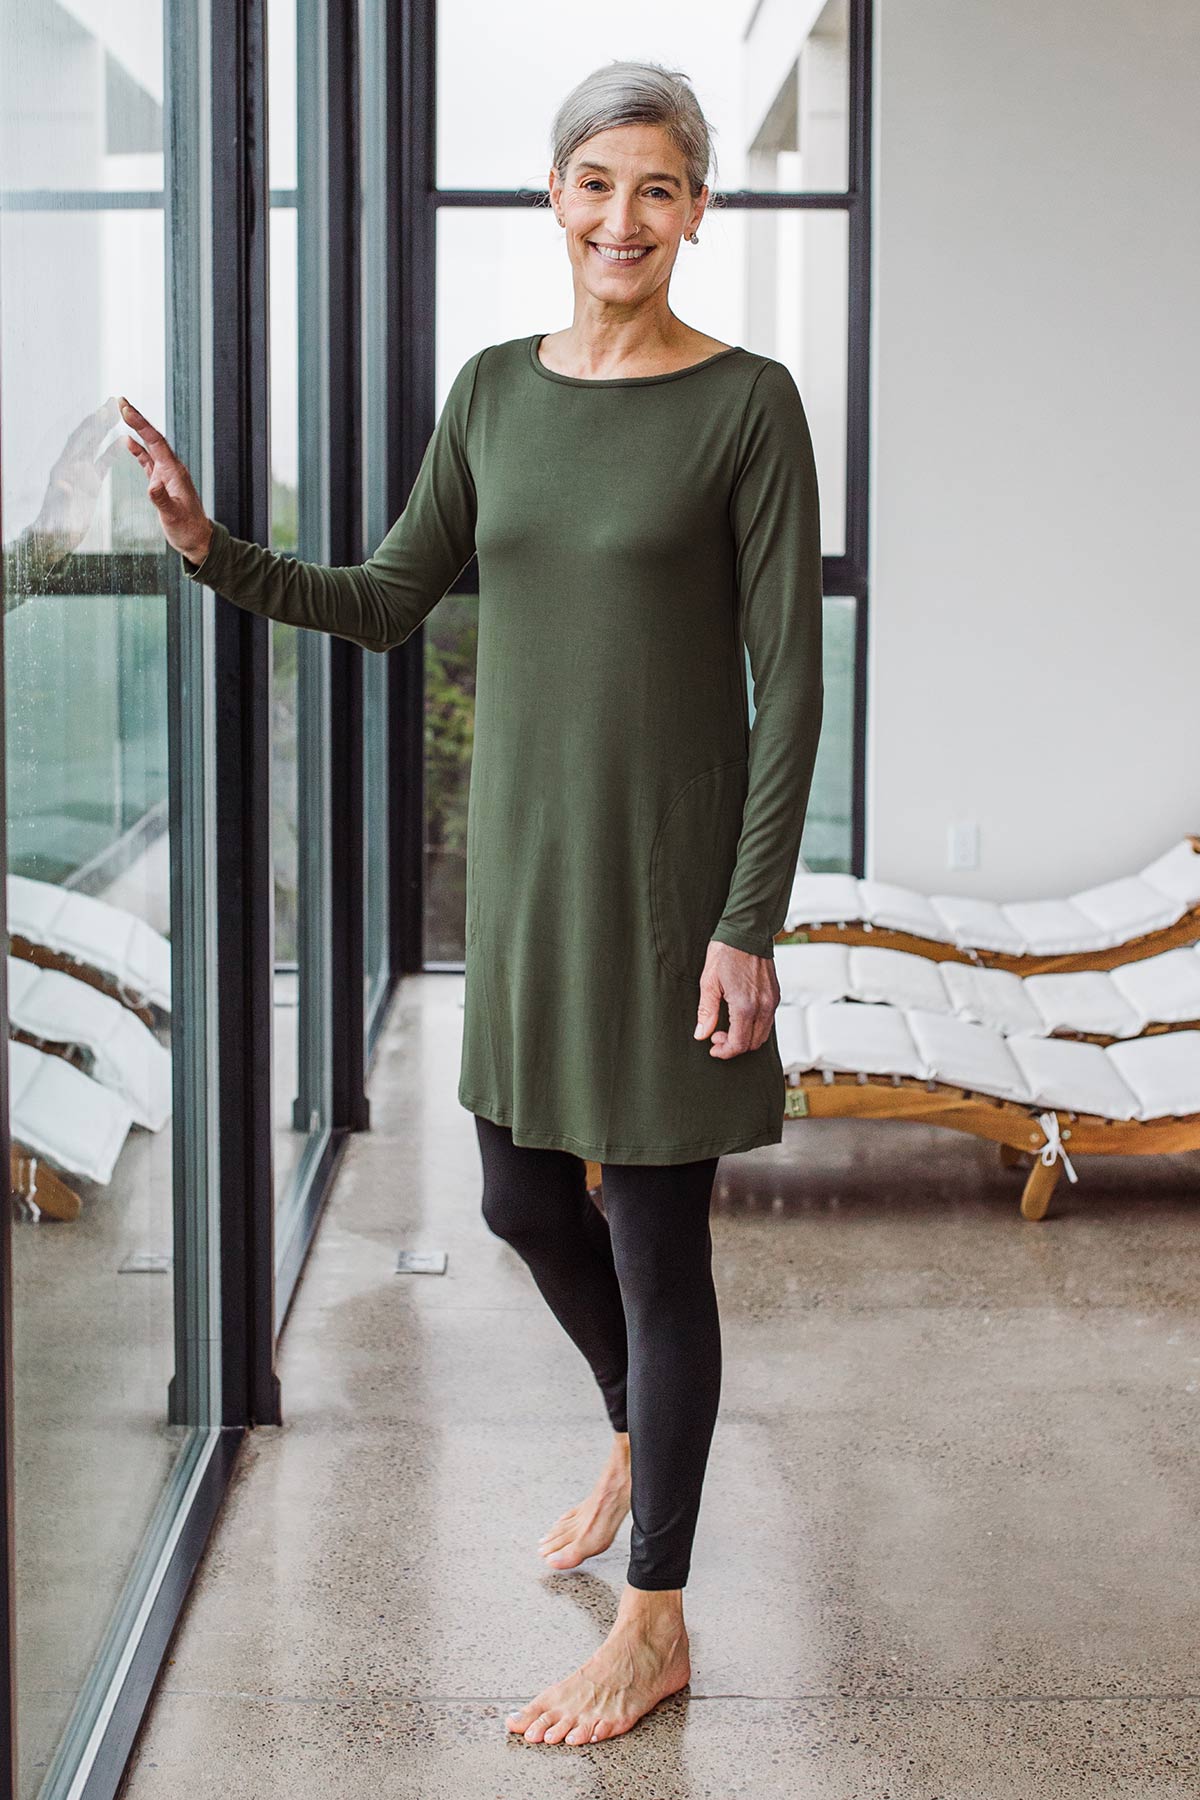 Woman standing and touching a window, wearing Yala Grace Buttersoft™ Bamboo Full Length Leggings in Black